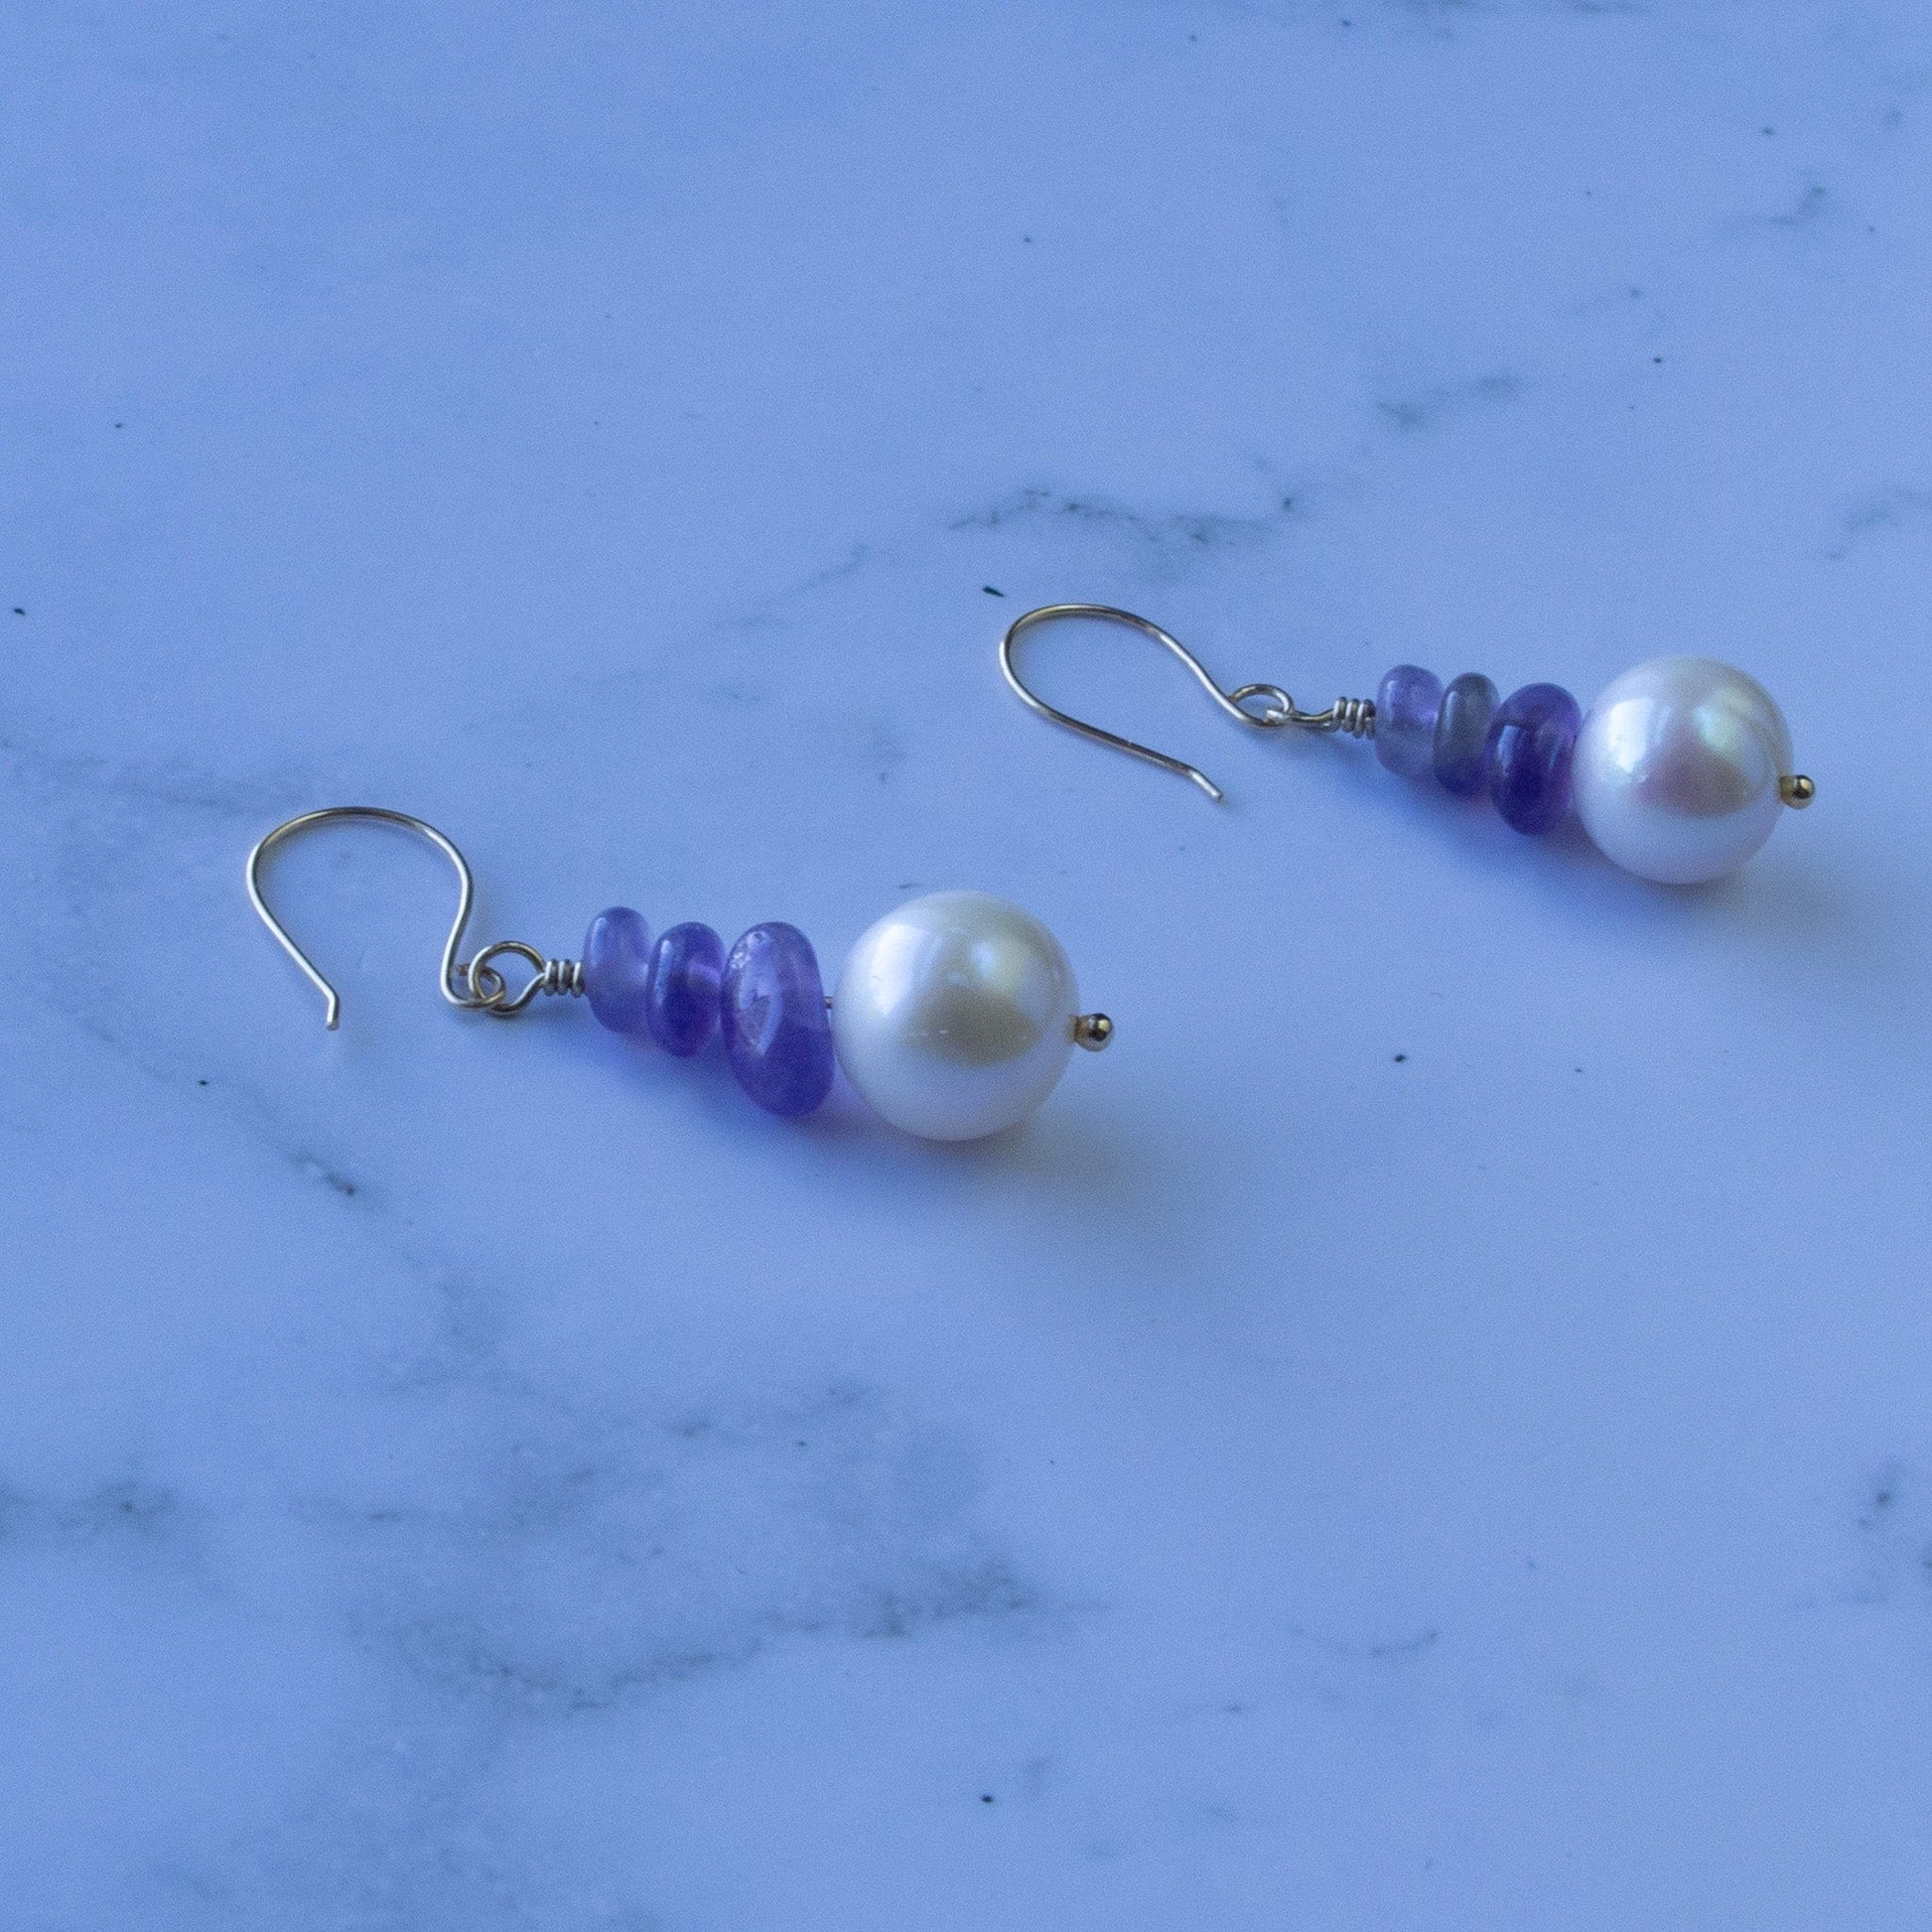 Arbor Trading Post Earrings Handcrafted Freshwater White Pearl Natural Amethyst 14K Gold Drop Earrings